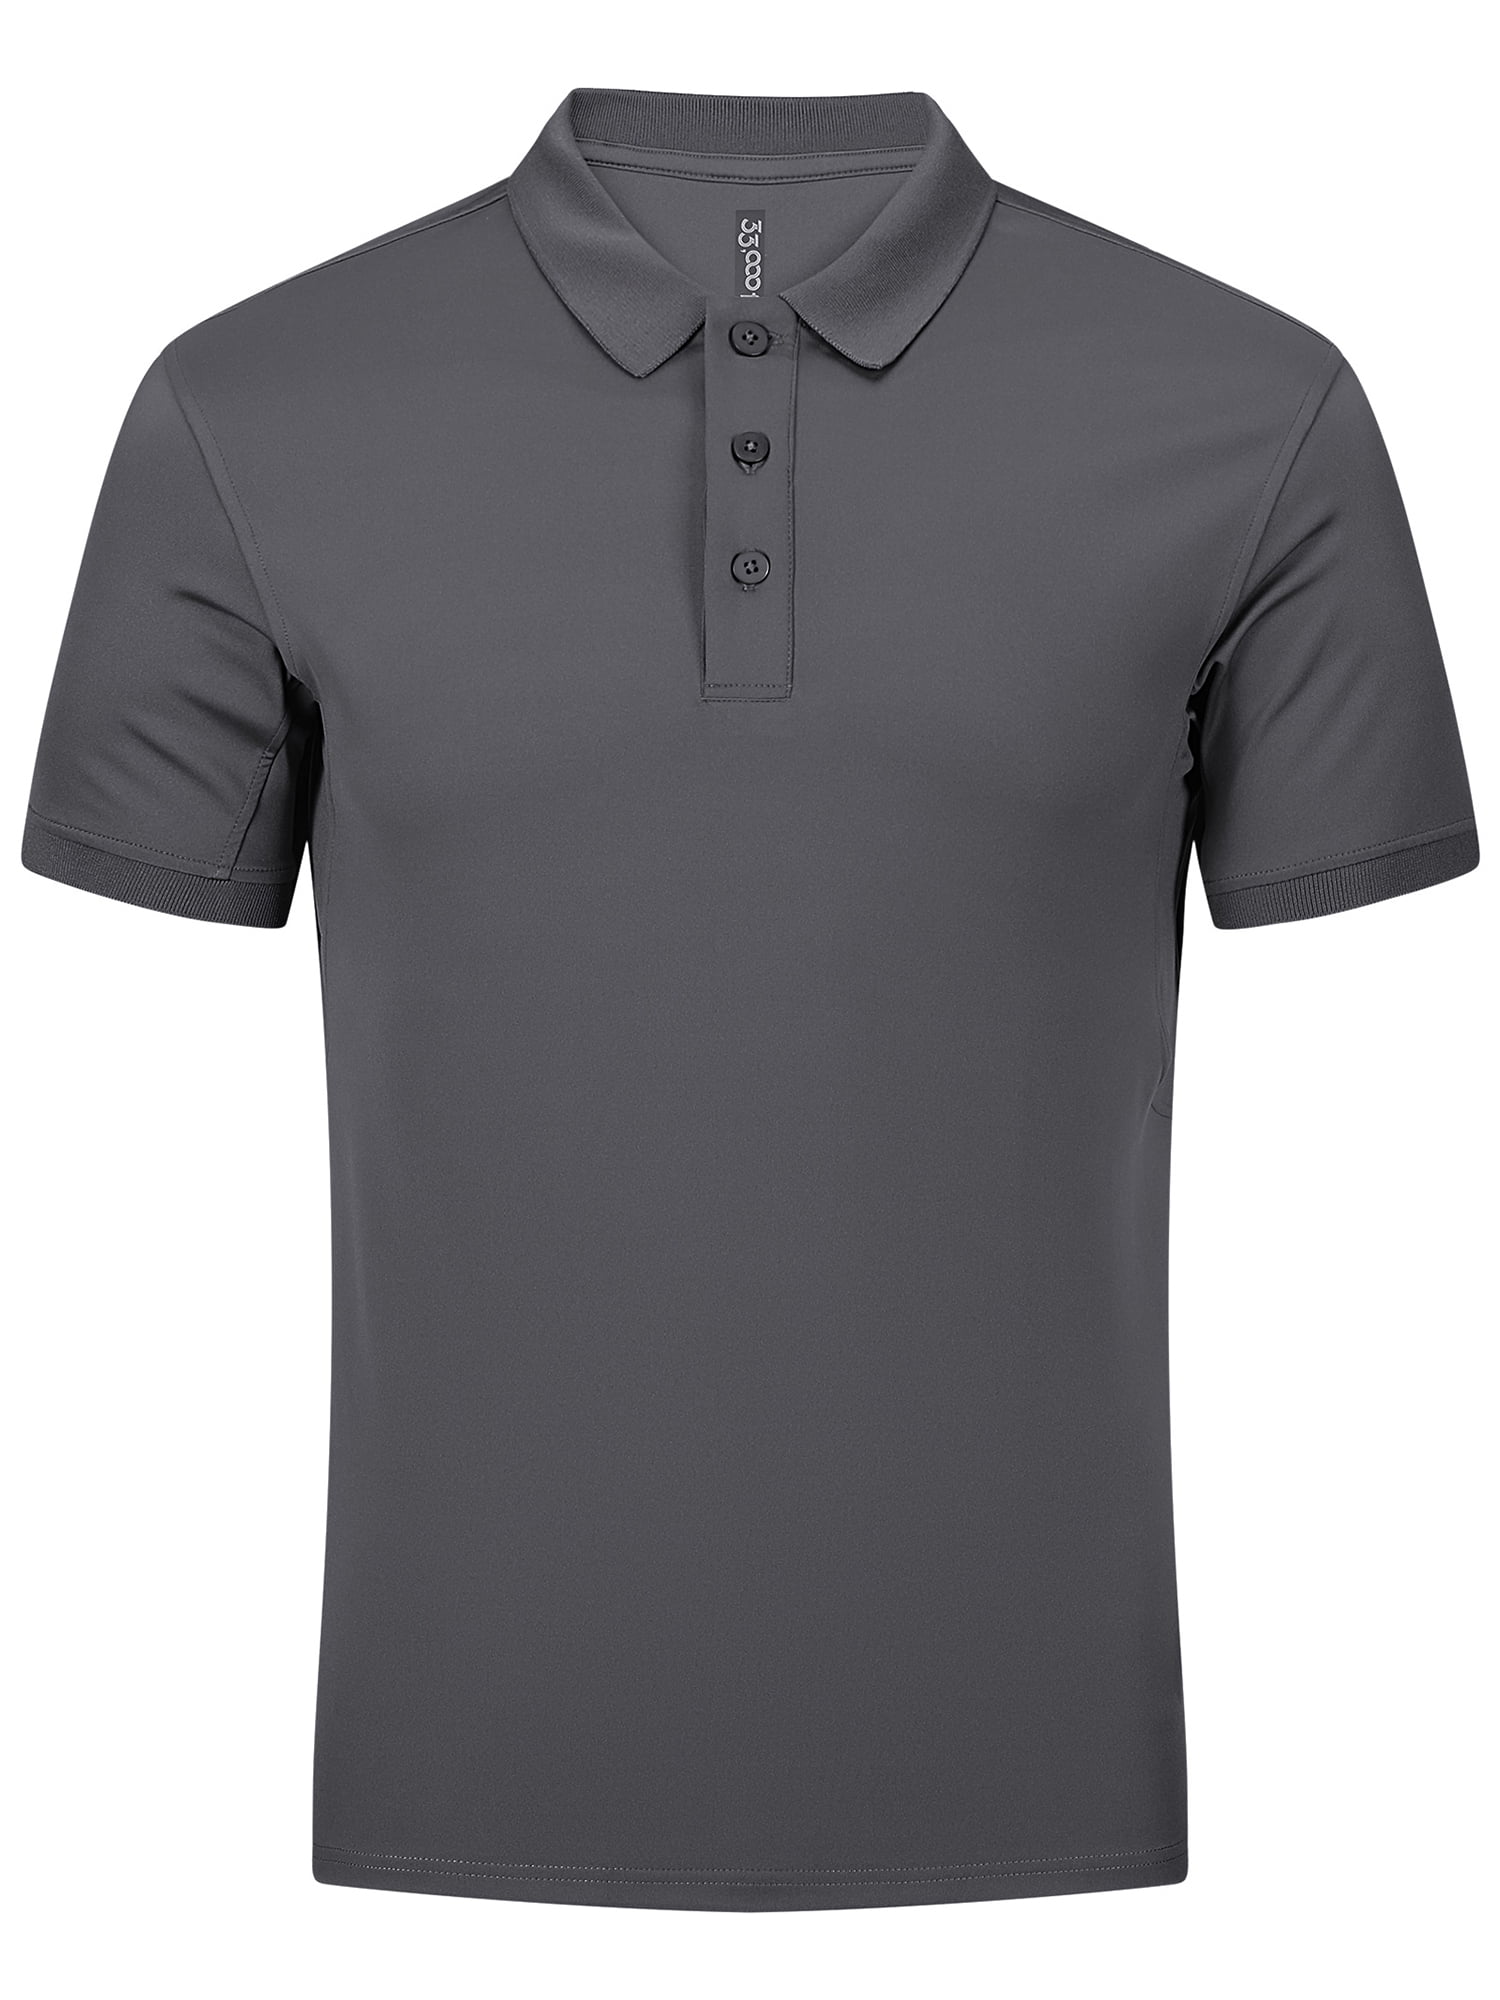 33,000ft Men's Golf Polo Shirts Short Sleeve Dry Fit Casual Workout ...